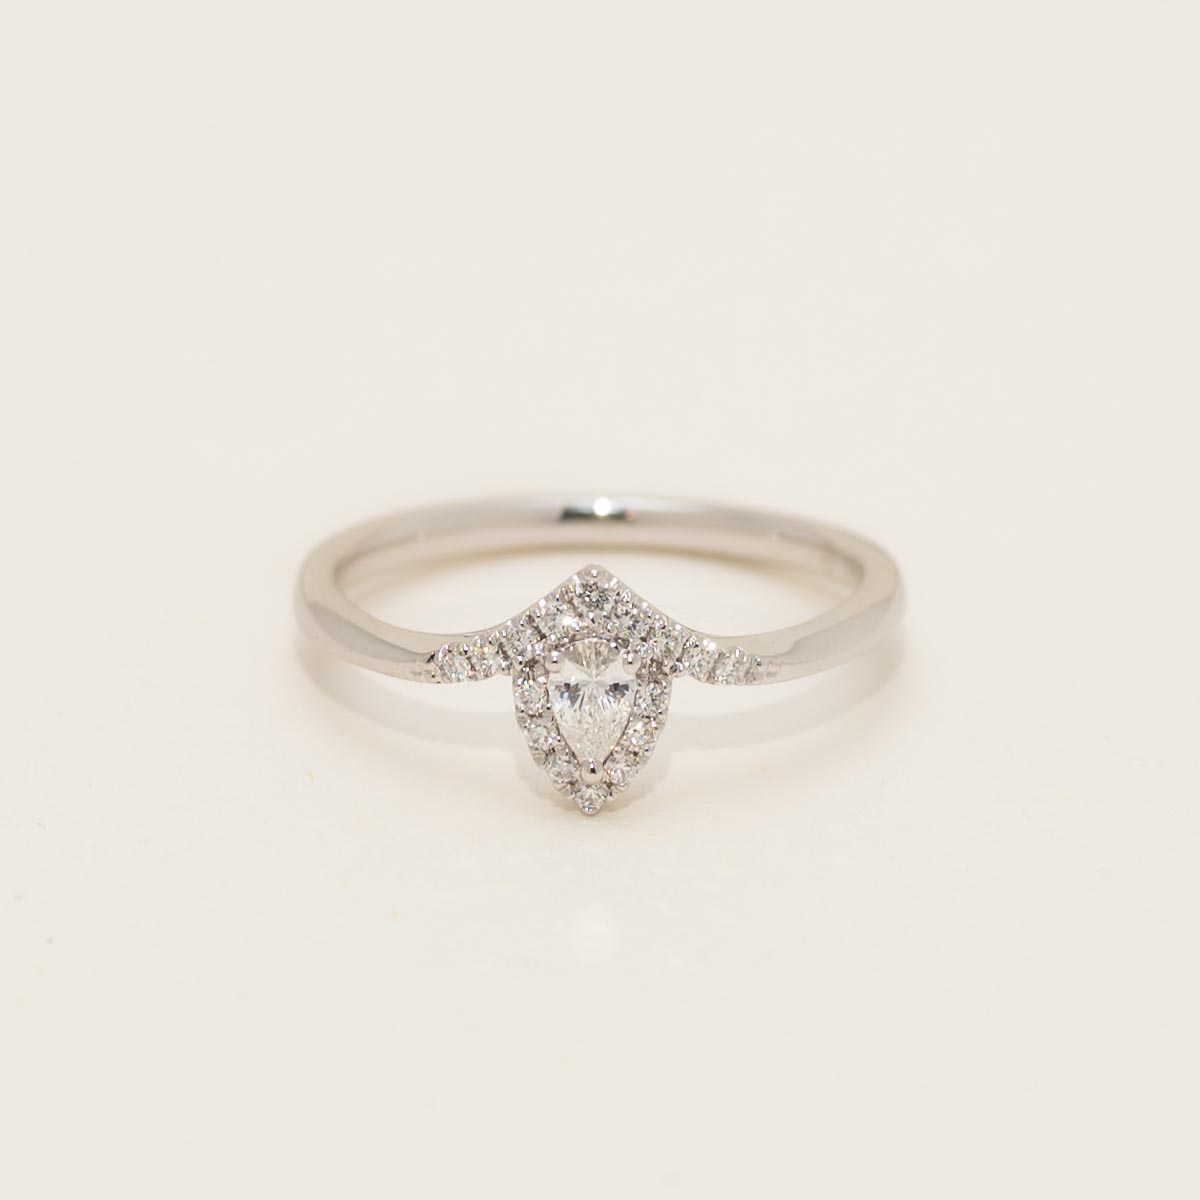 Pear Shaped Diamond Fashion Ring in 14kt White Gold (1/5ct tw)